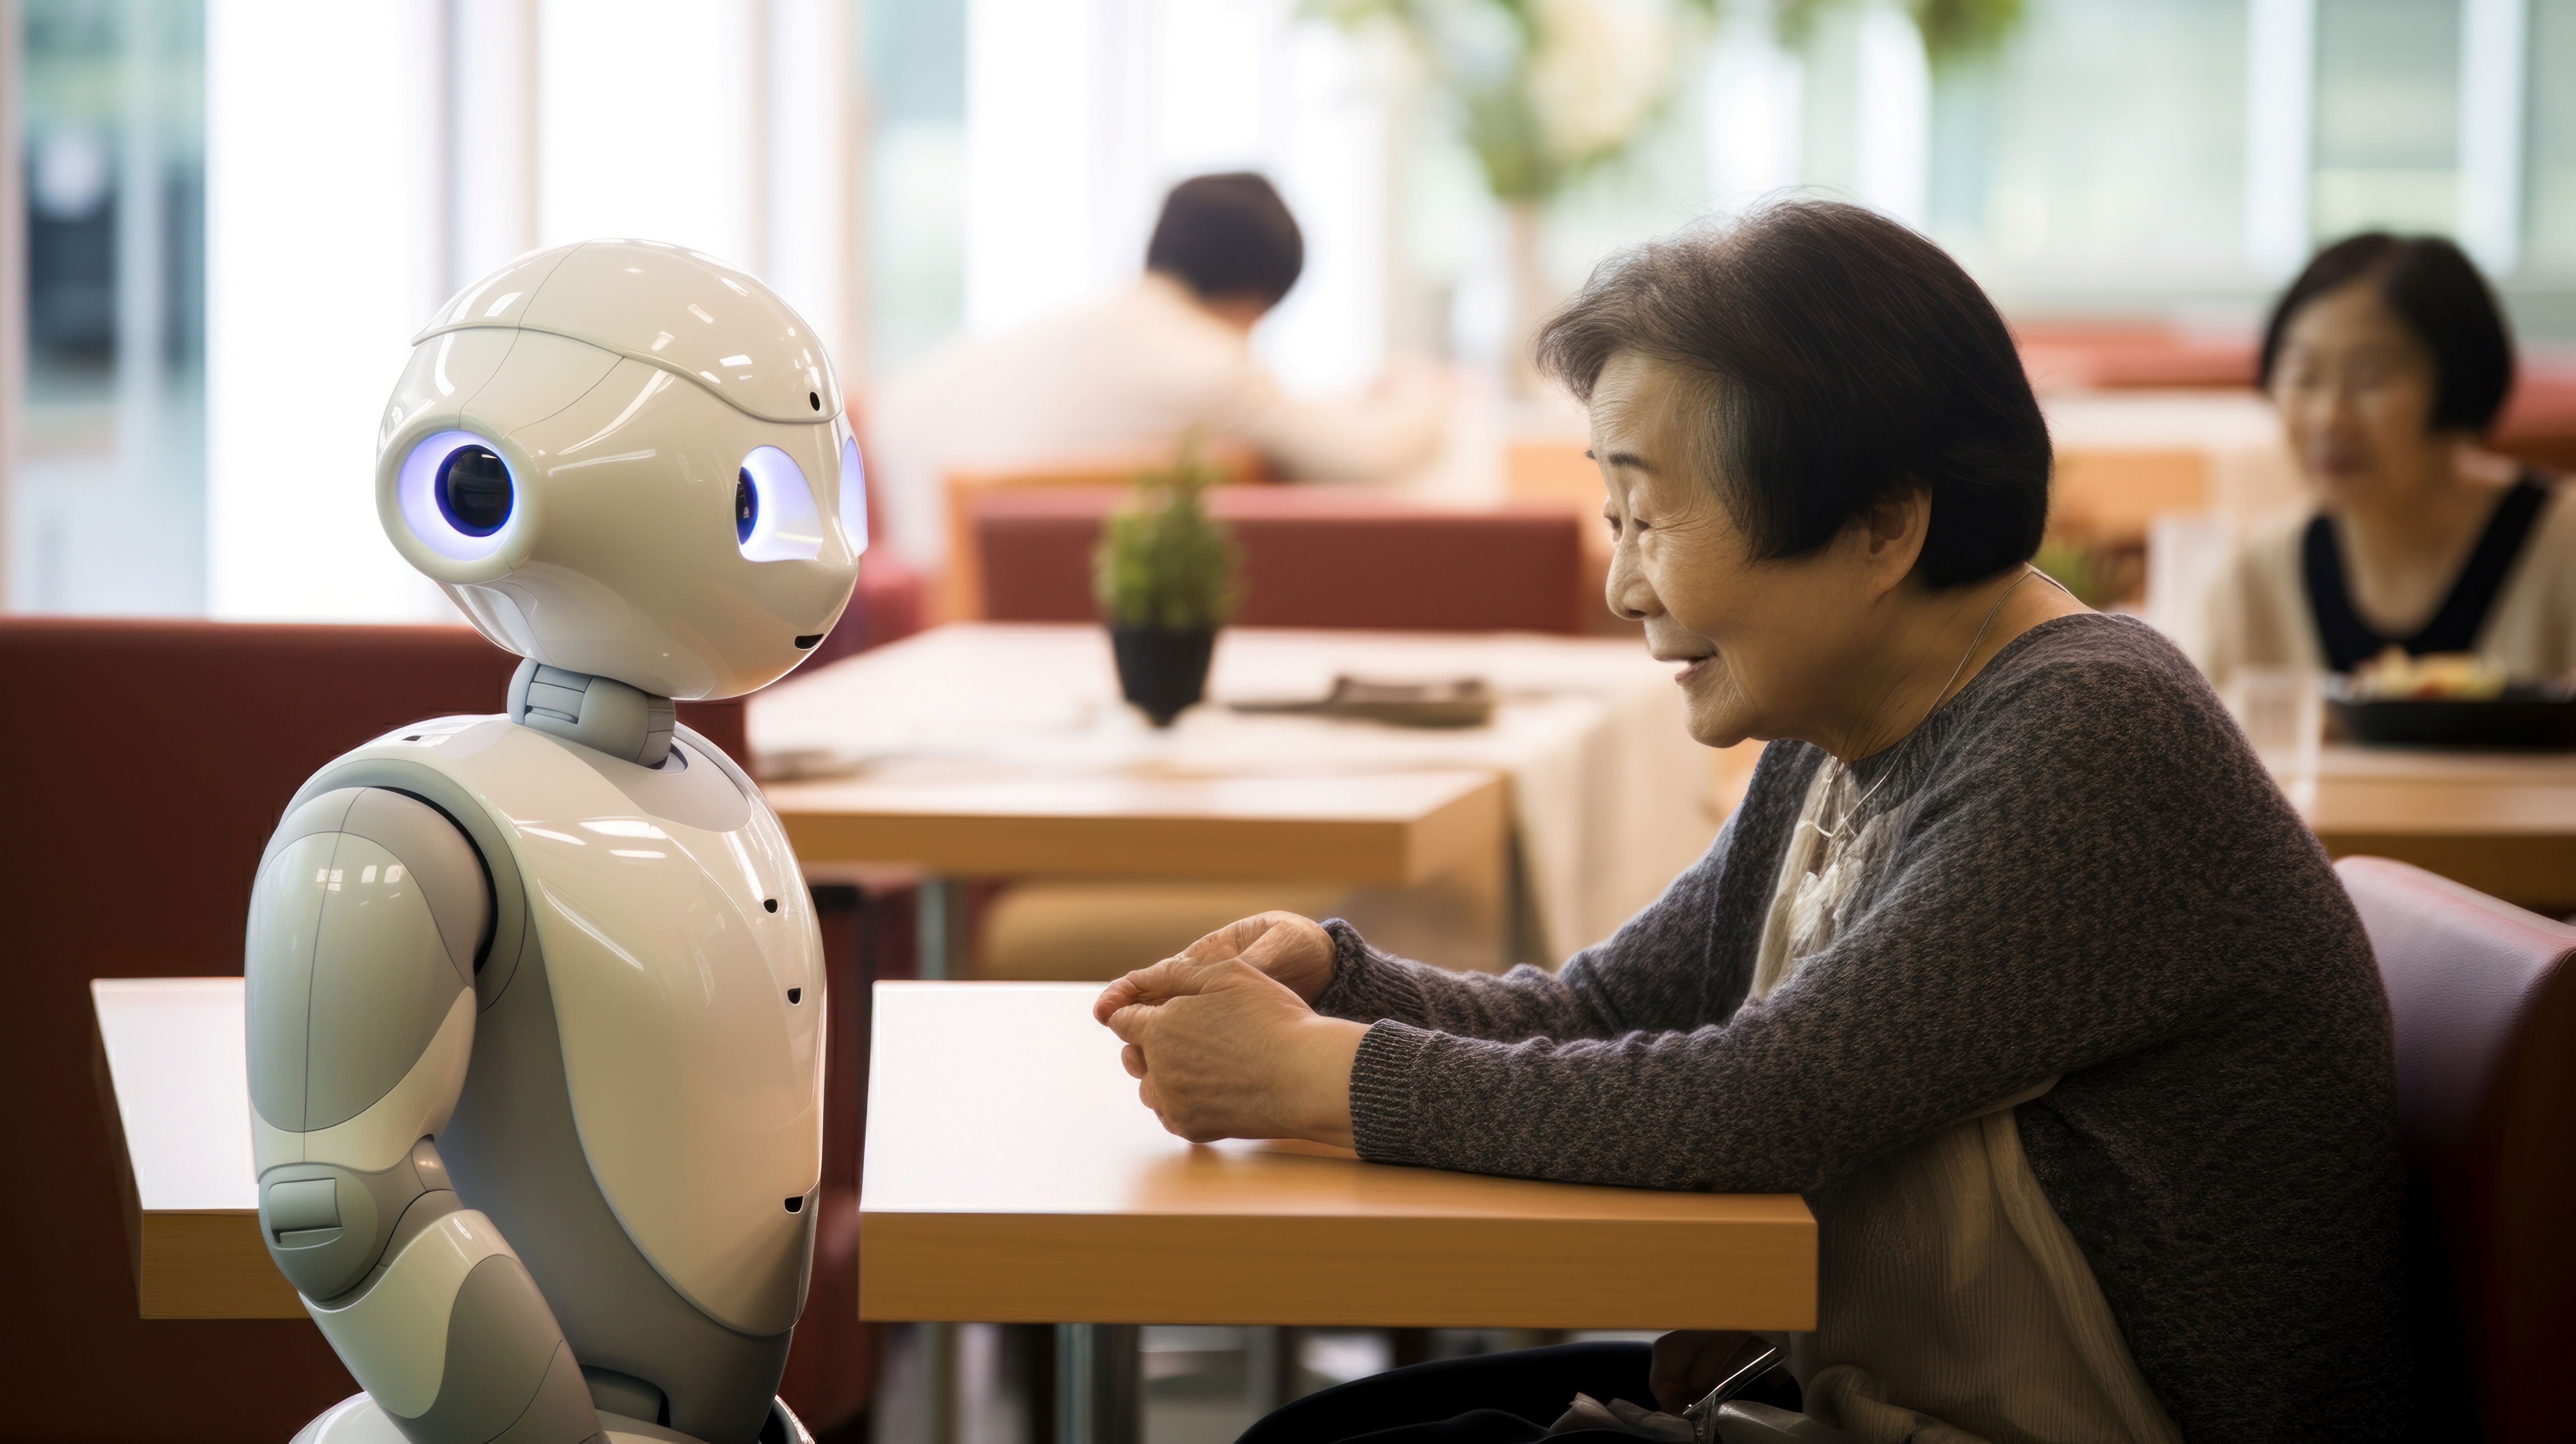 Image by Zayatssv from Adobe Stock - Title - robot assistant helps a person in a hospital, future concept